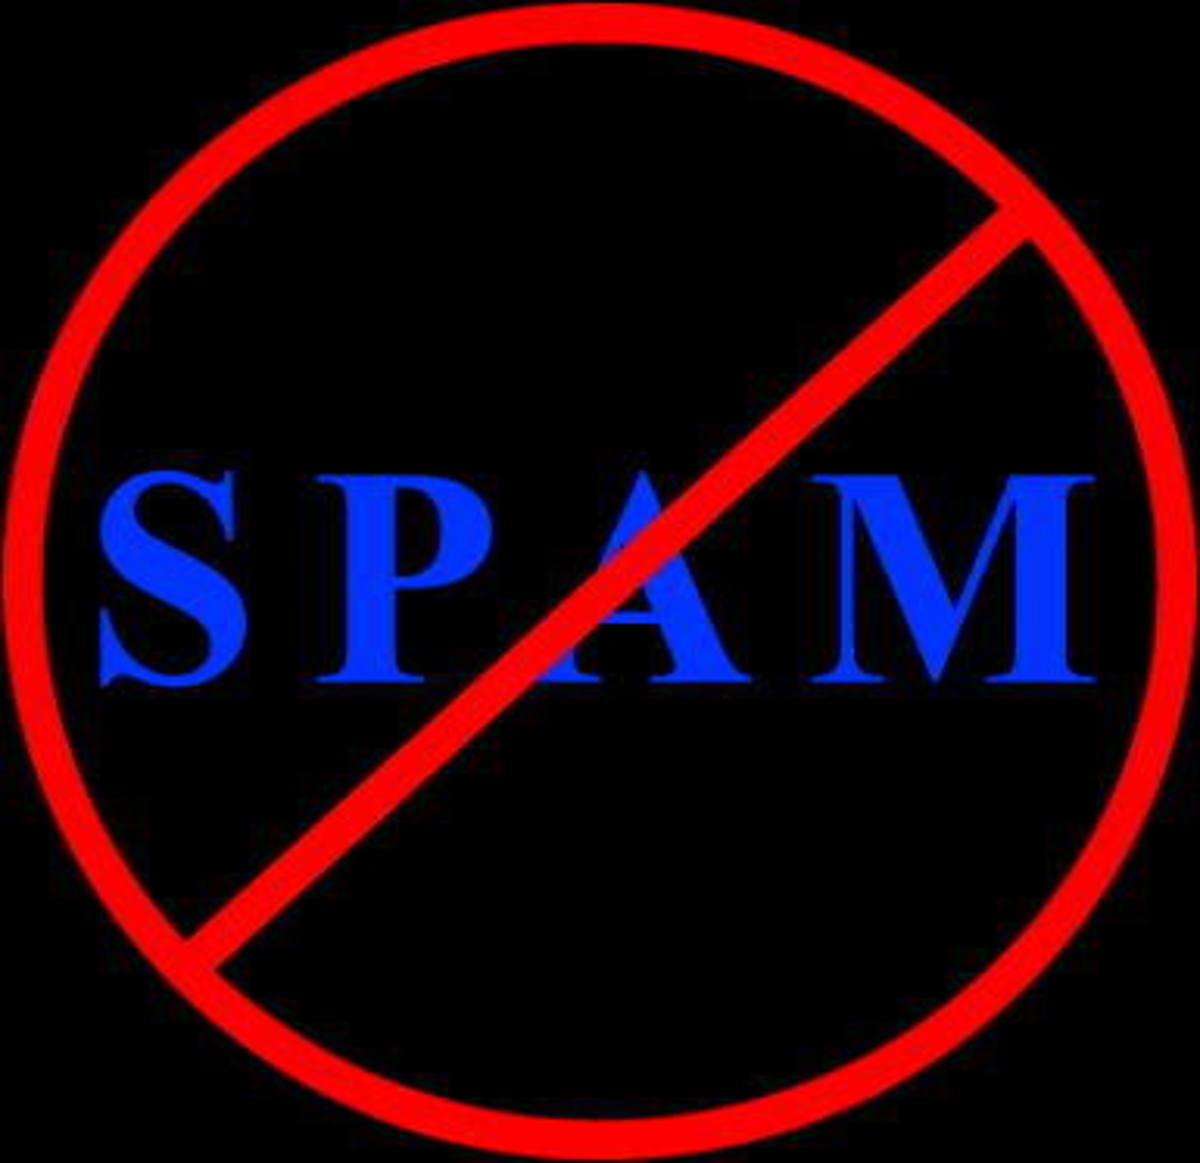 spamsieve is putting thousands of good messages in spam